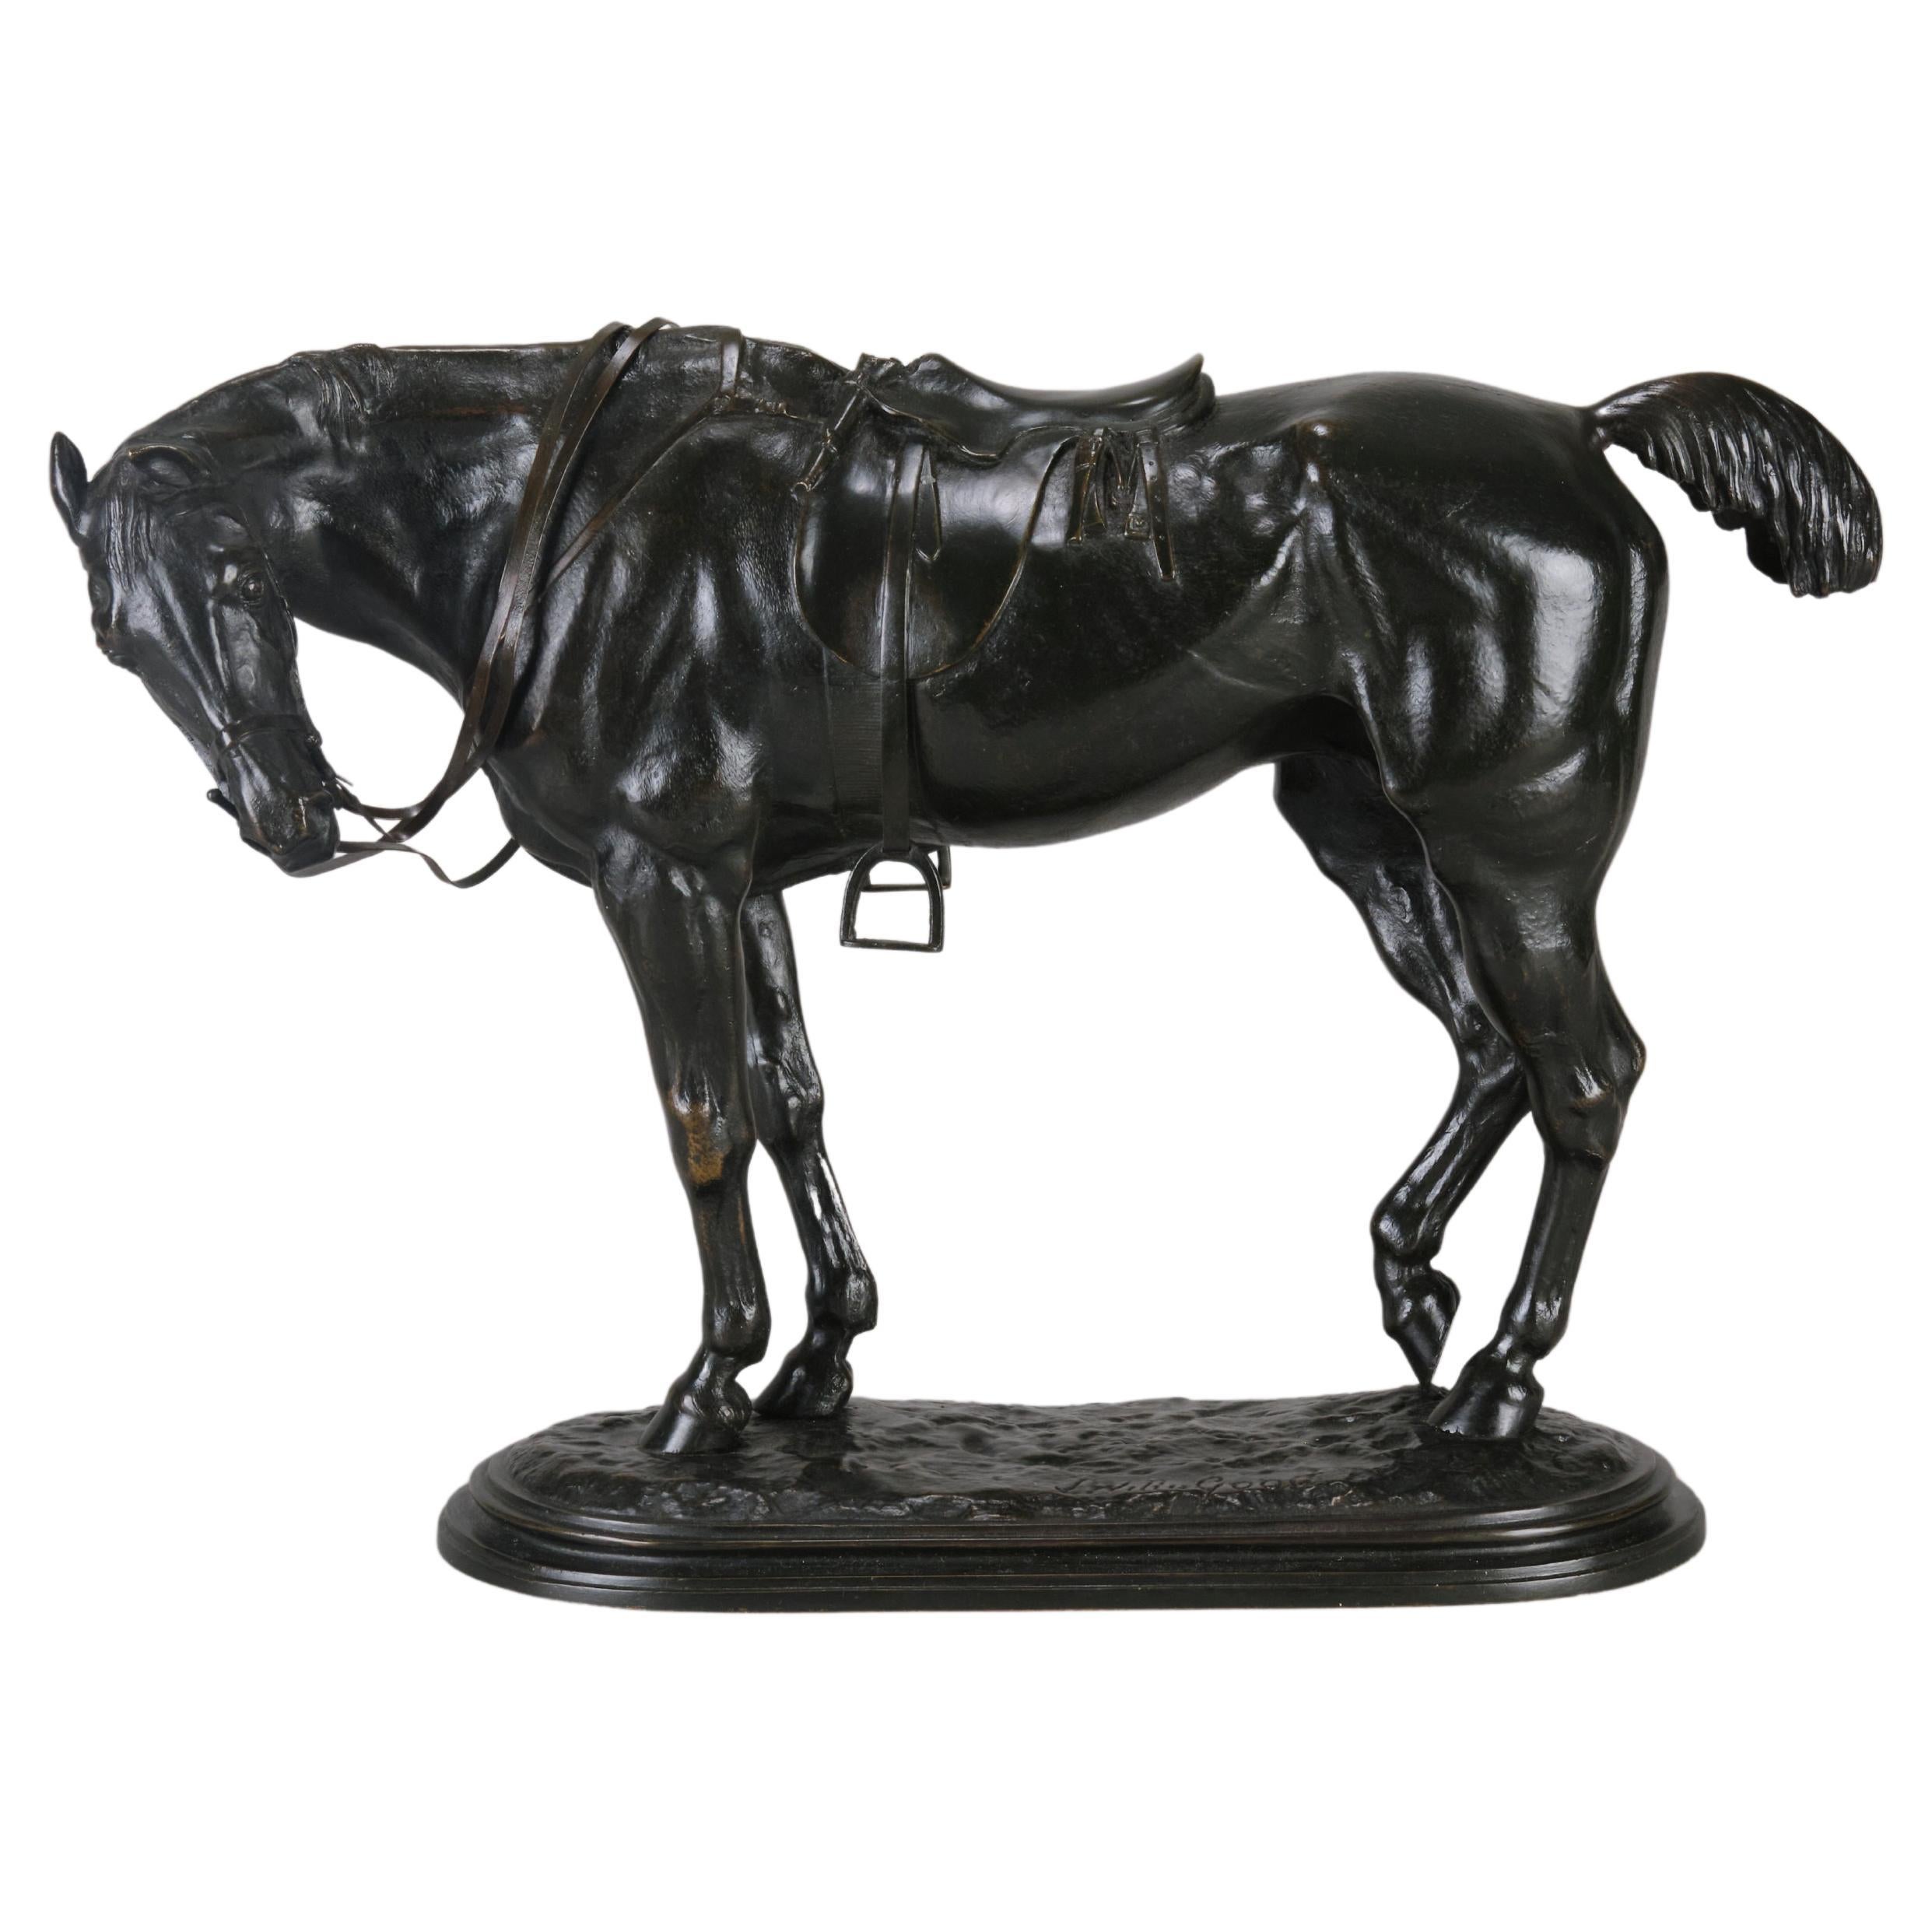 19th Century Animalier Bronze Study Entitled "Tired Hunter" by John Willis-Good For Sale